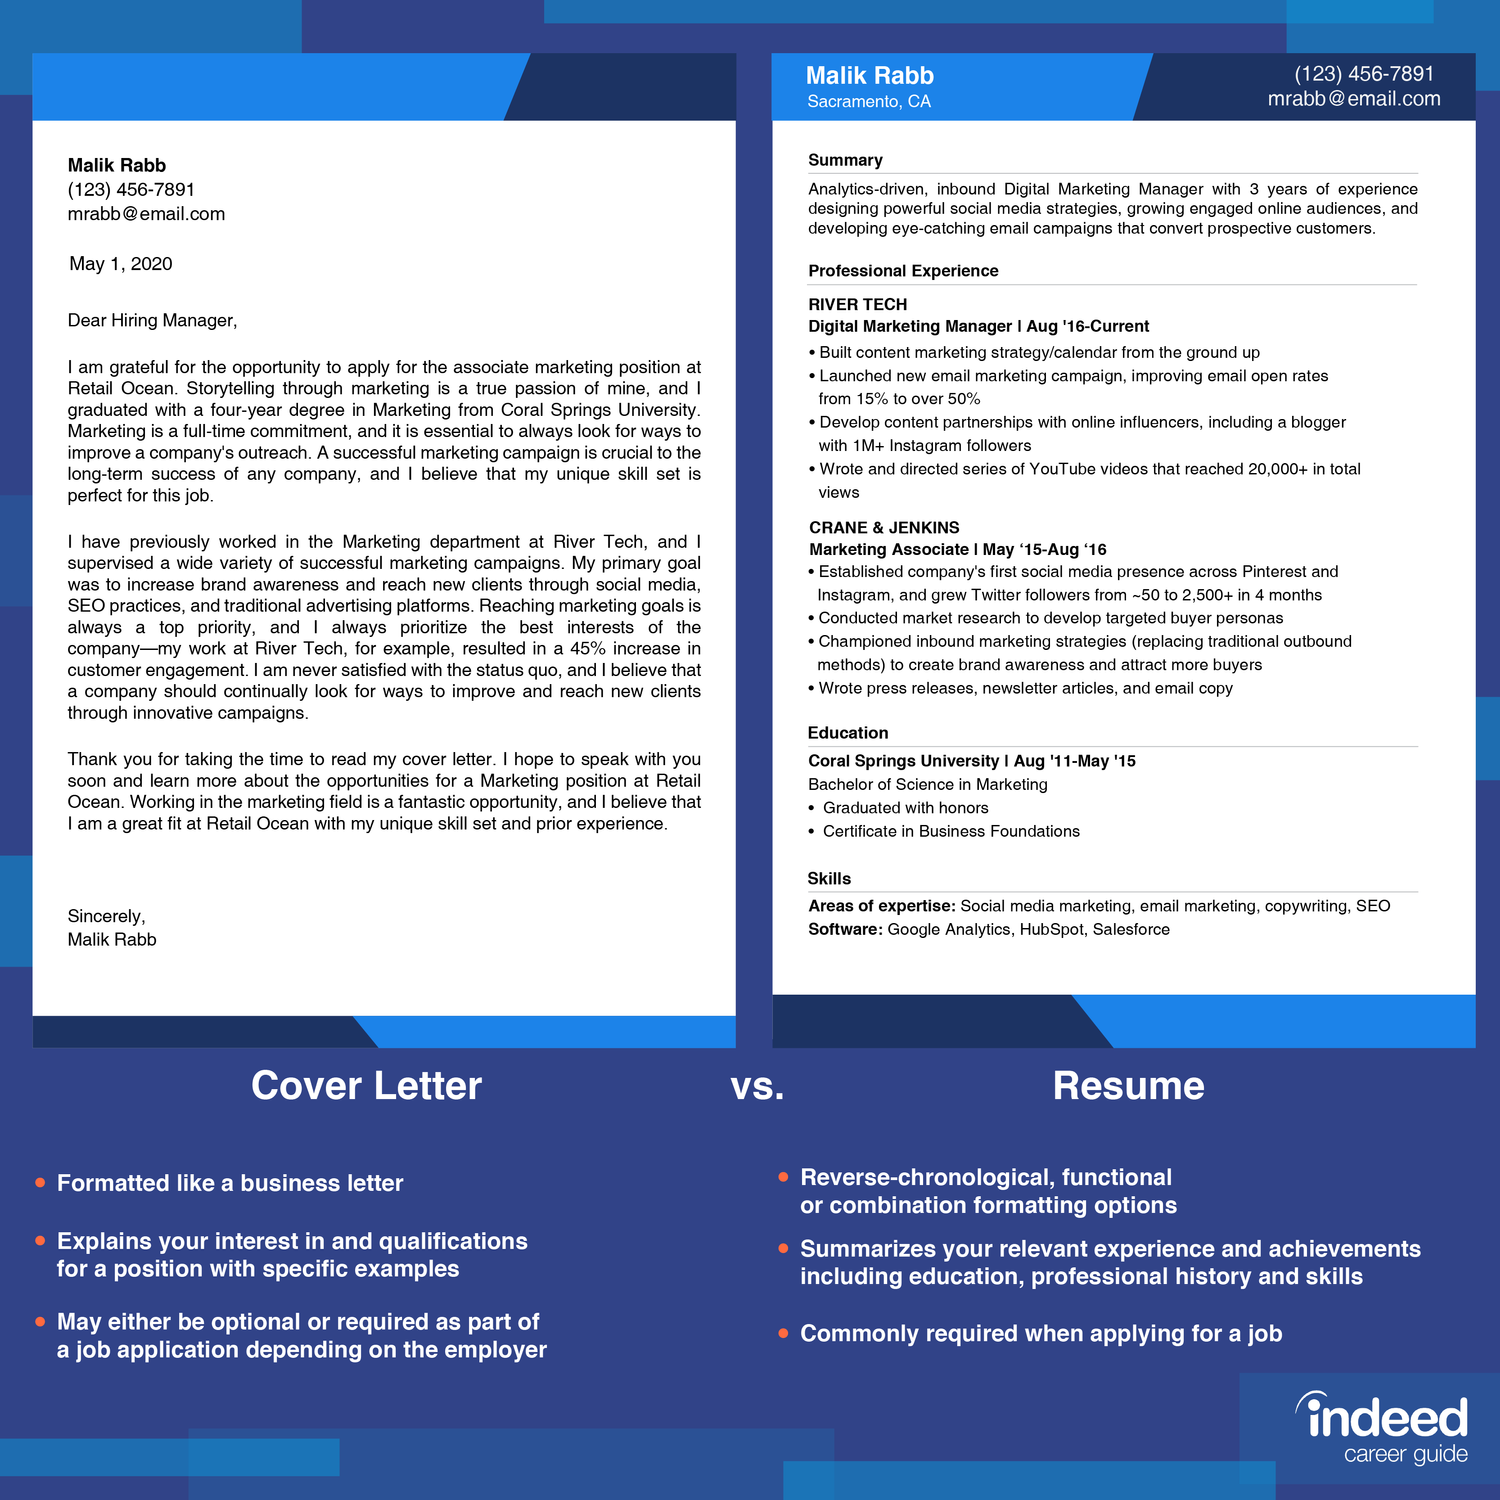 Resume vs. Cover Letter: Whats the Difference?